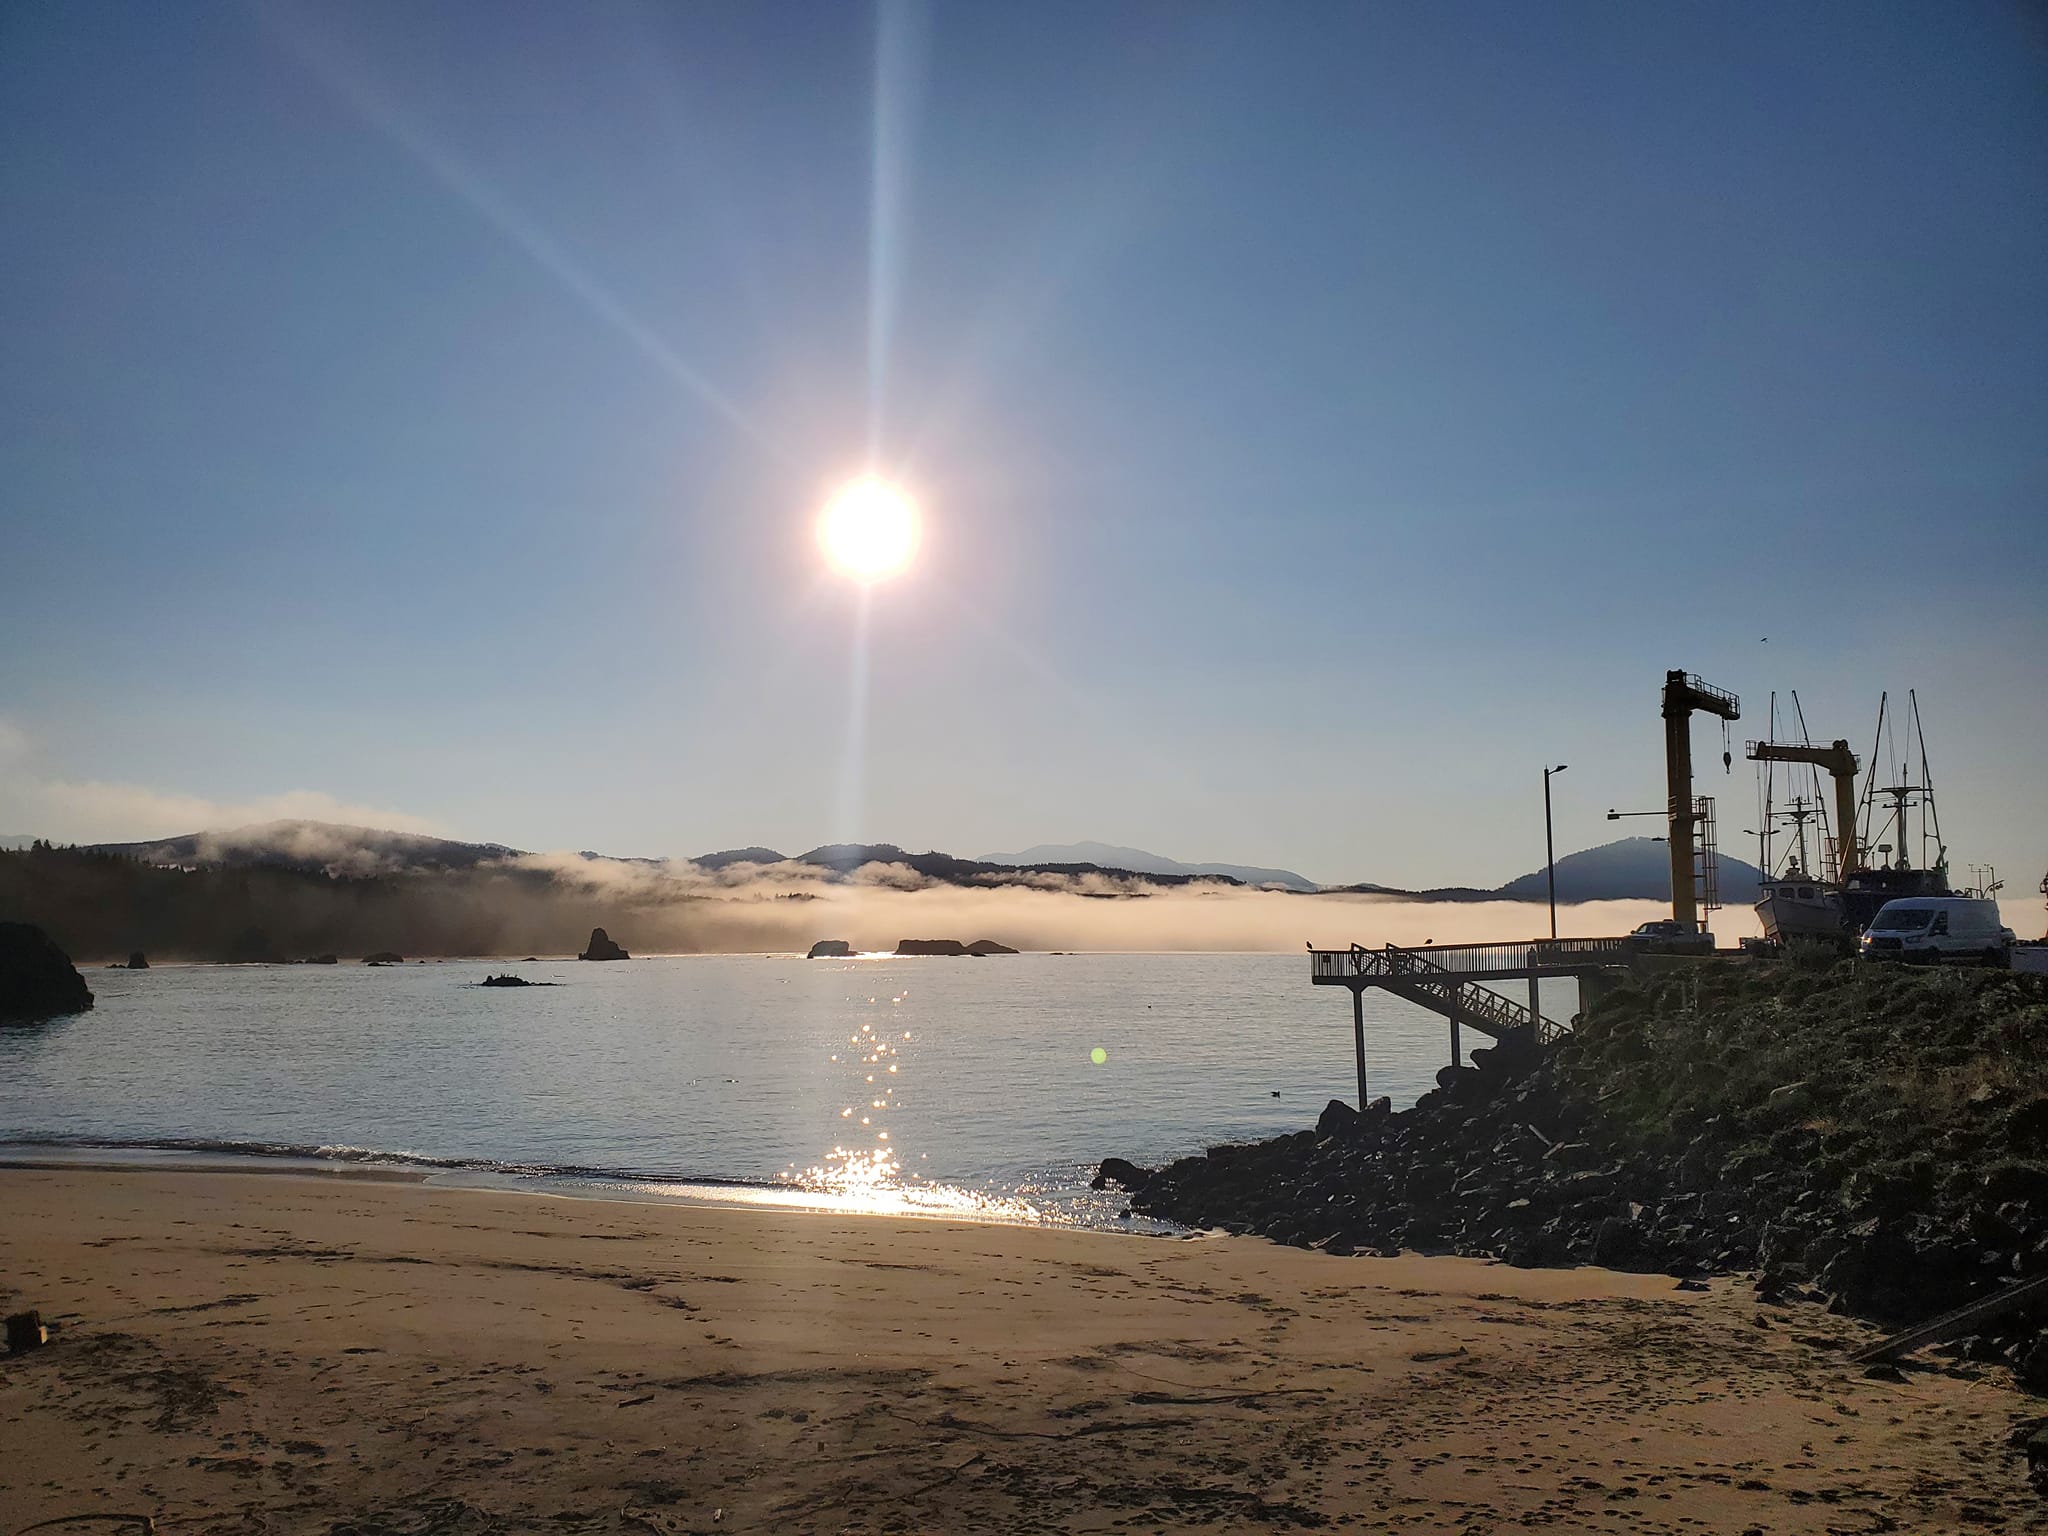 Low fog on the horizon at the Port of Port Orford, Oregon